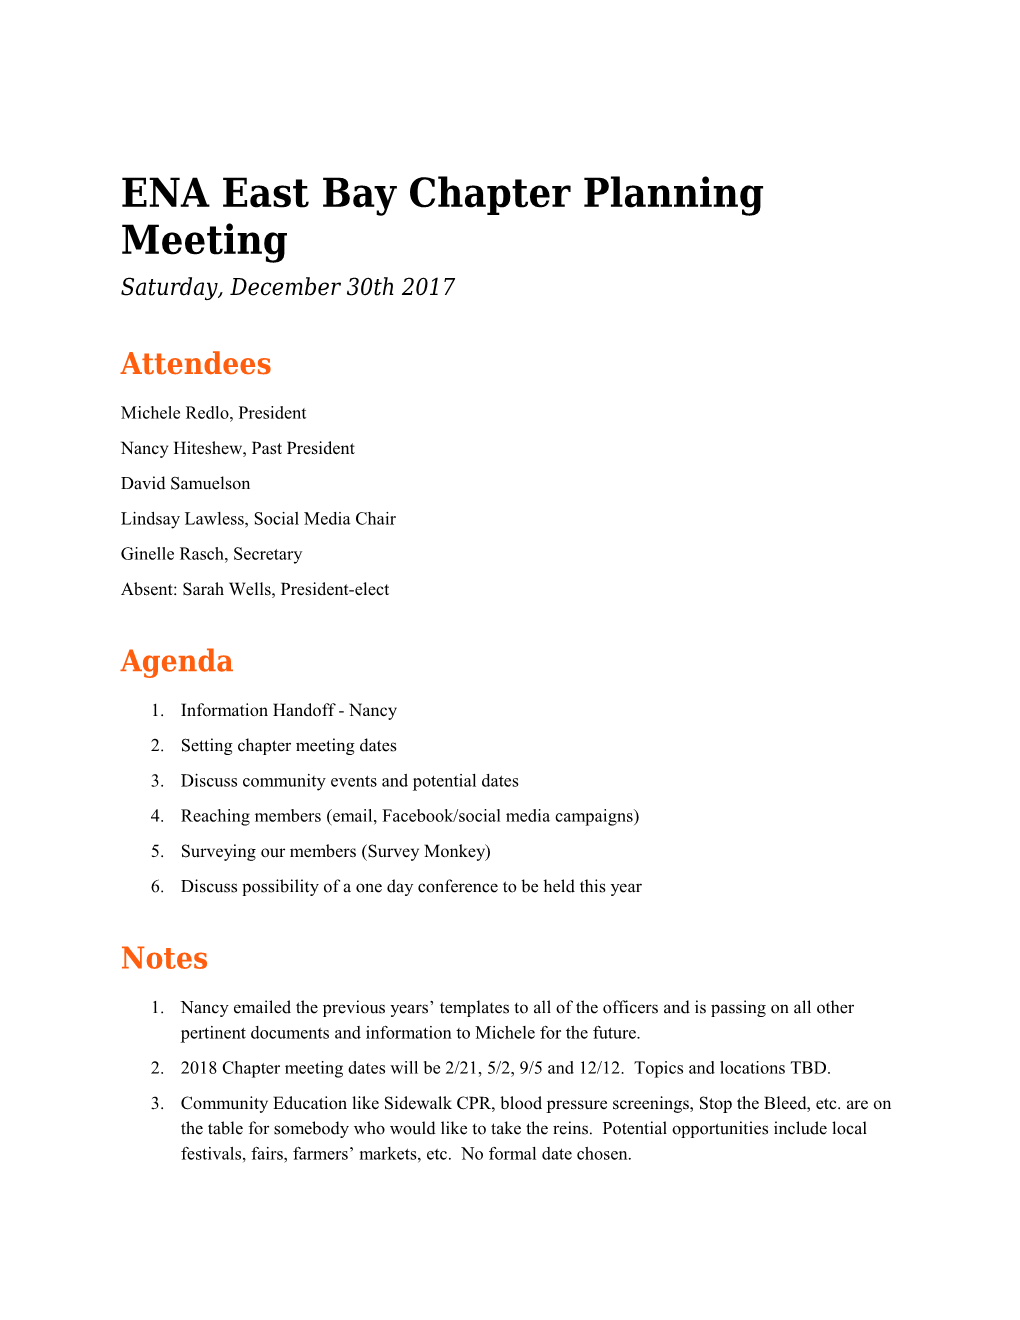 ENA East Bay Chapter Planning Meeting